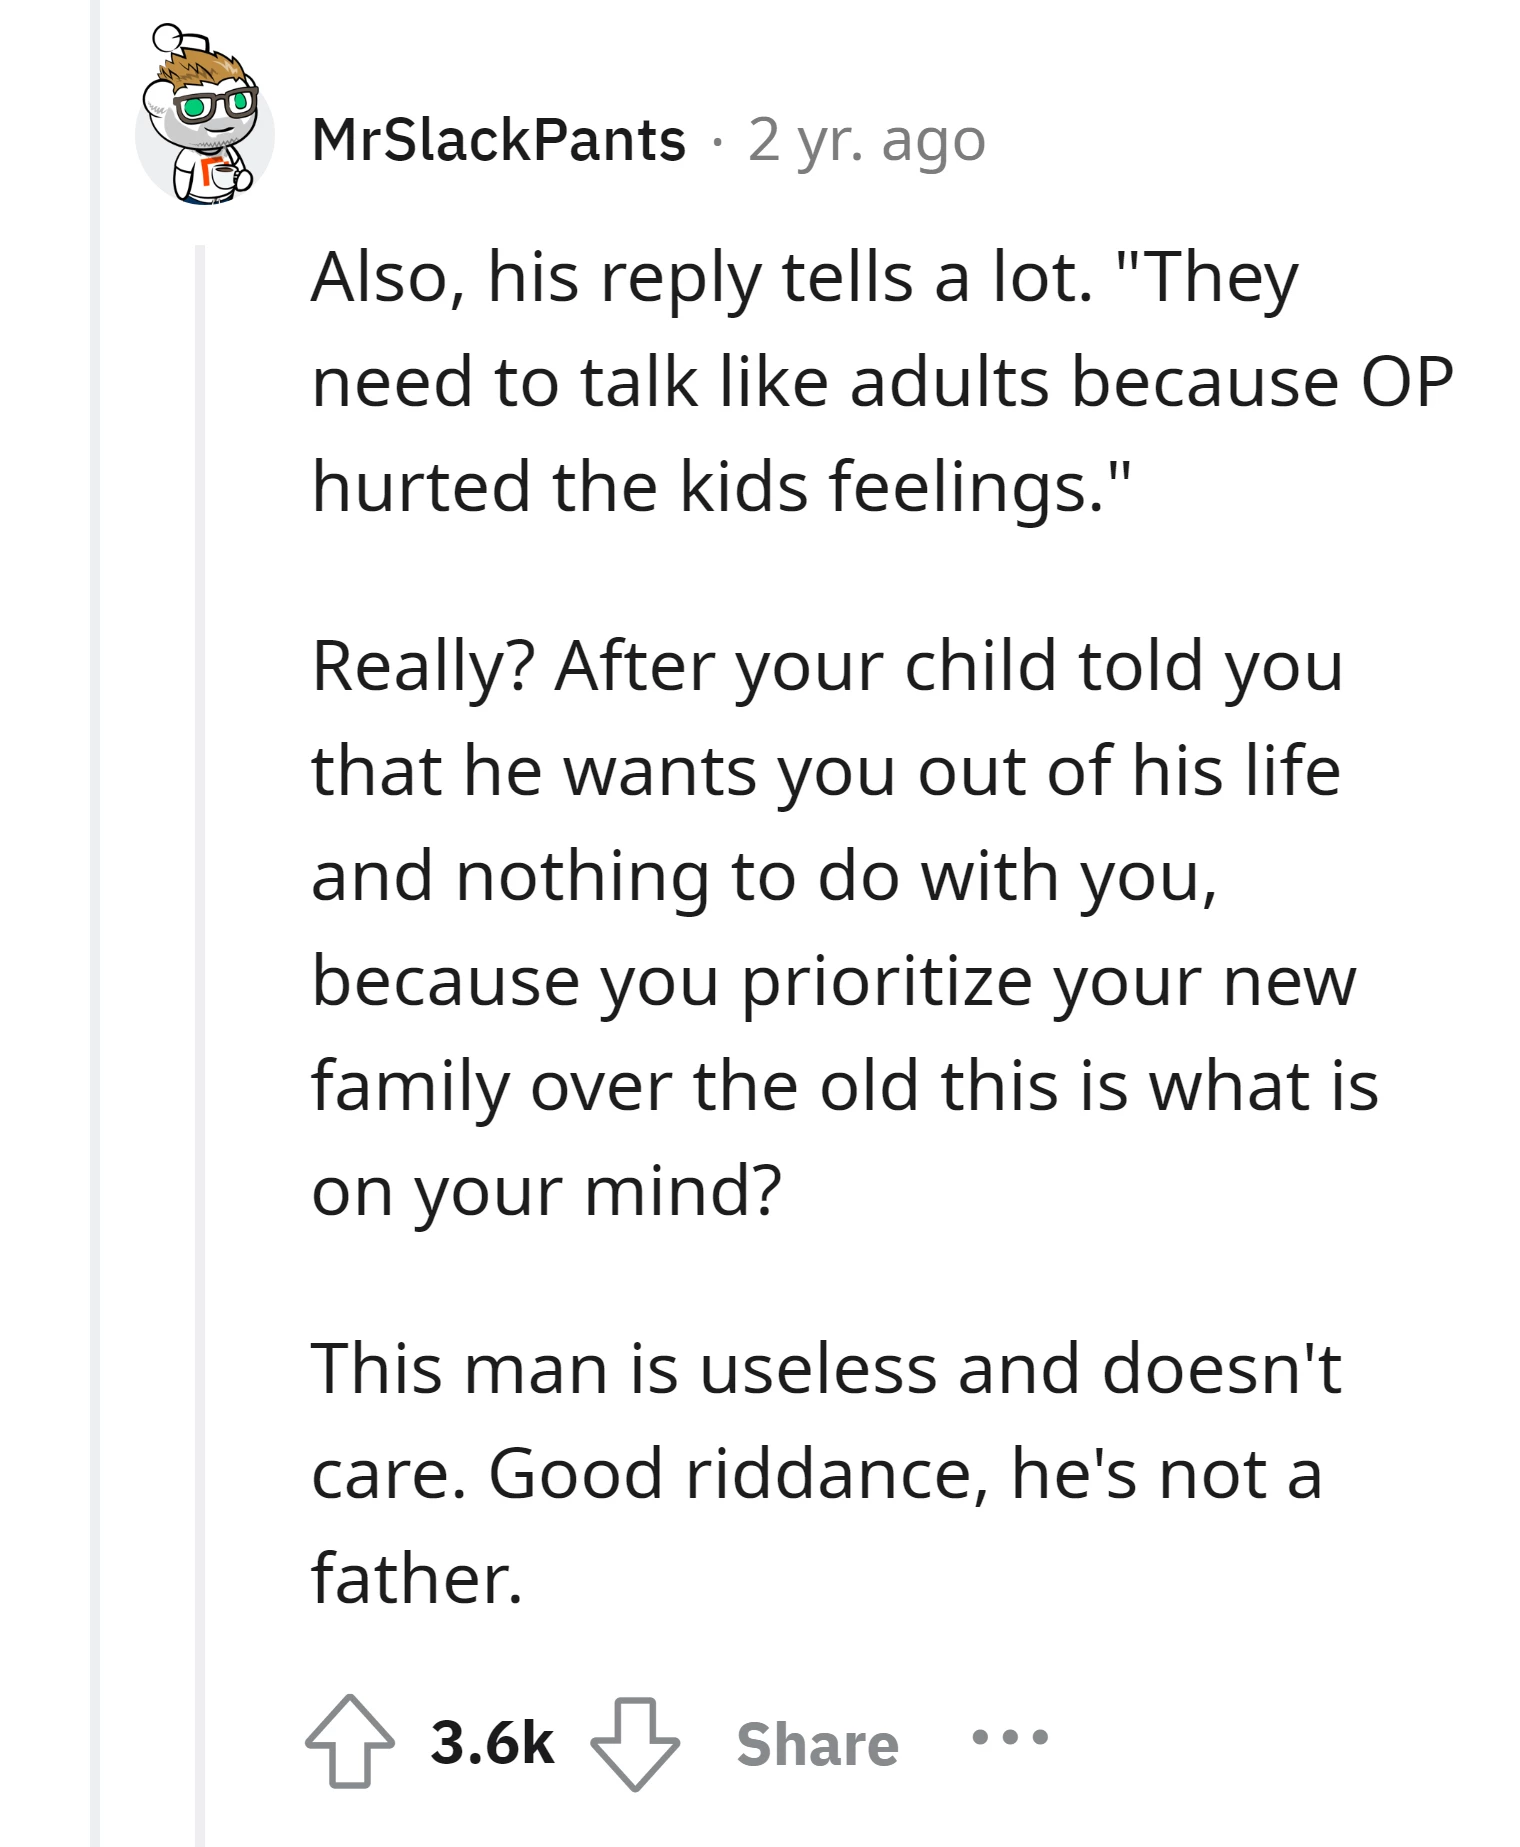 The dad is useless and not a true father